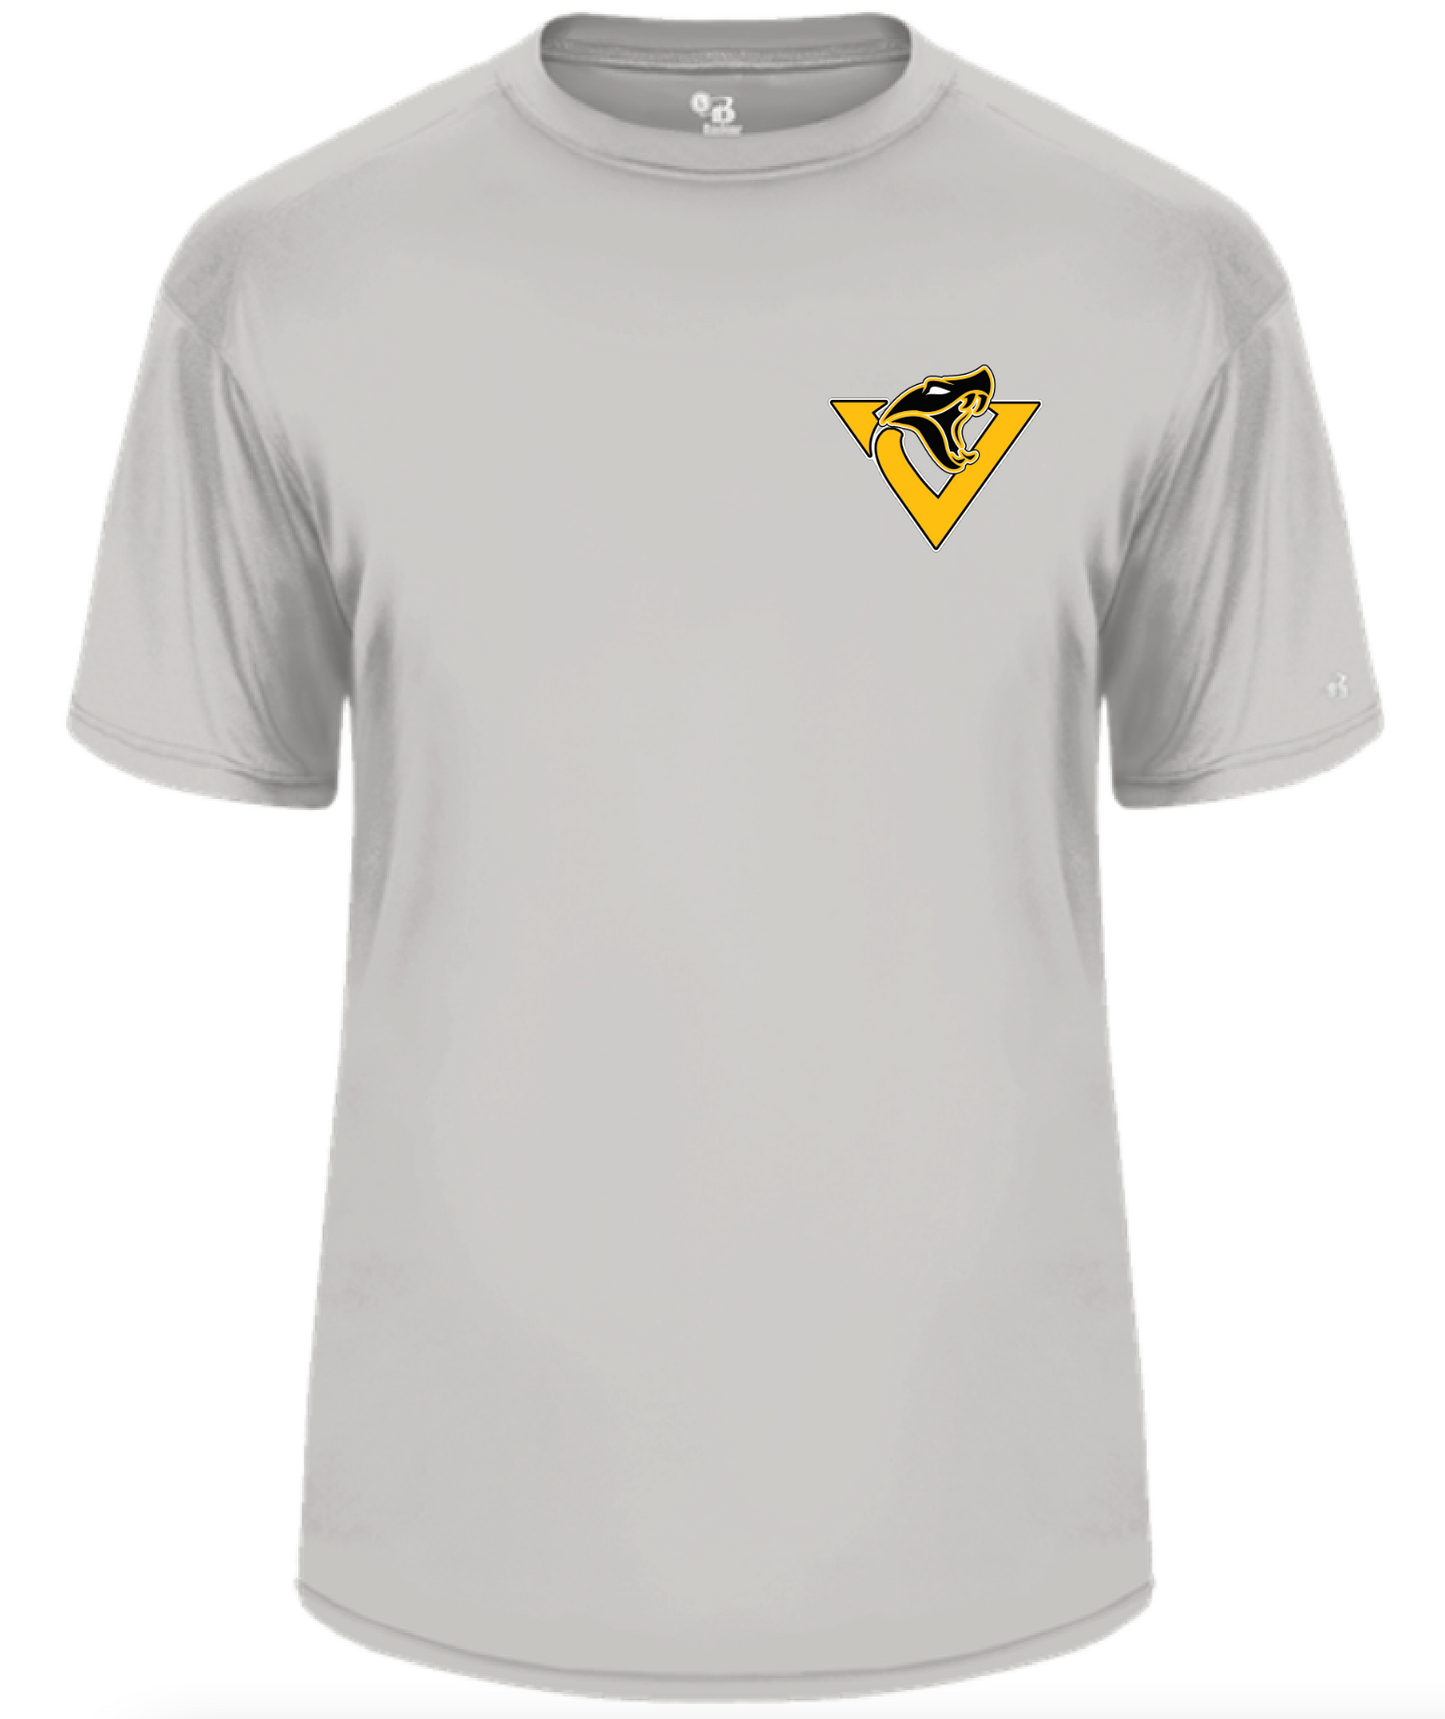 Vipers Performance Tee